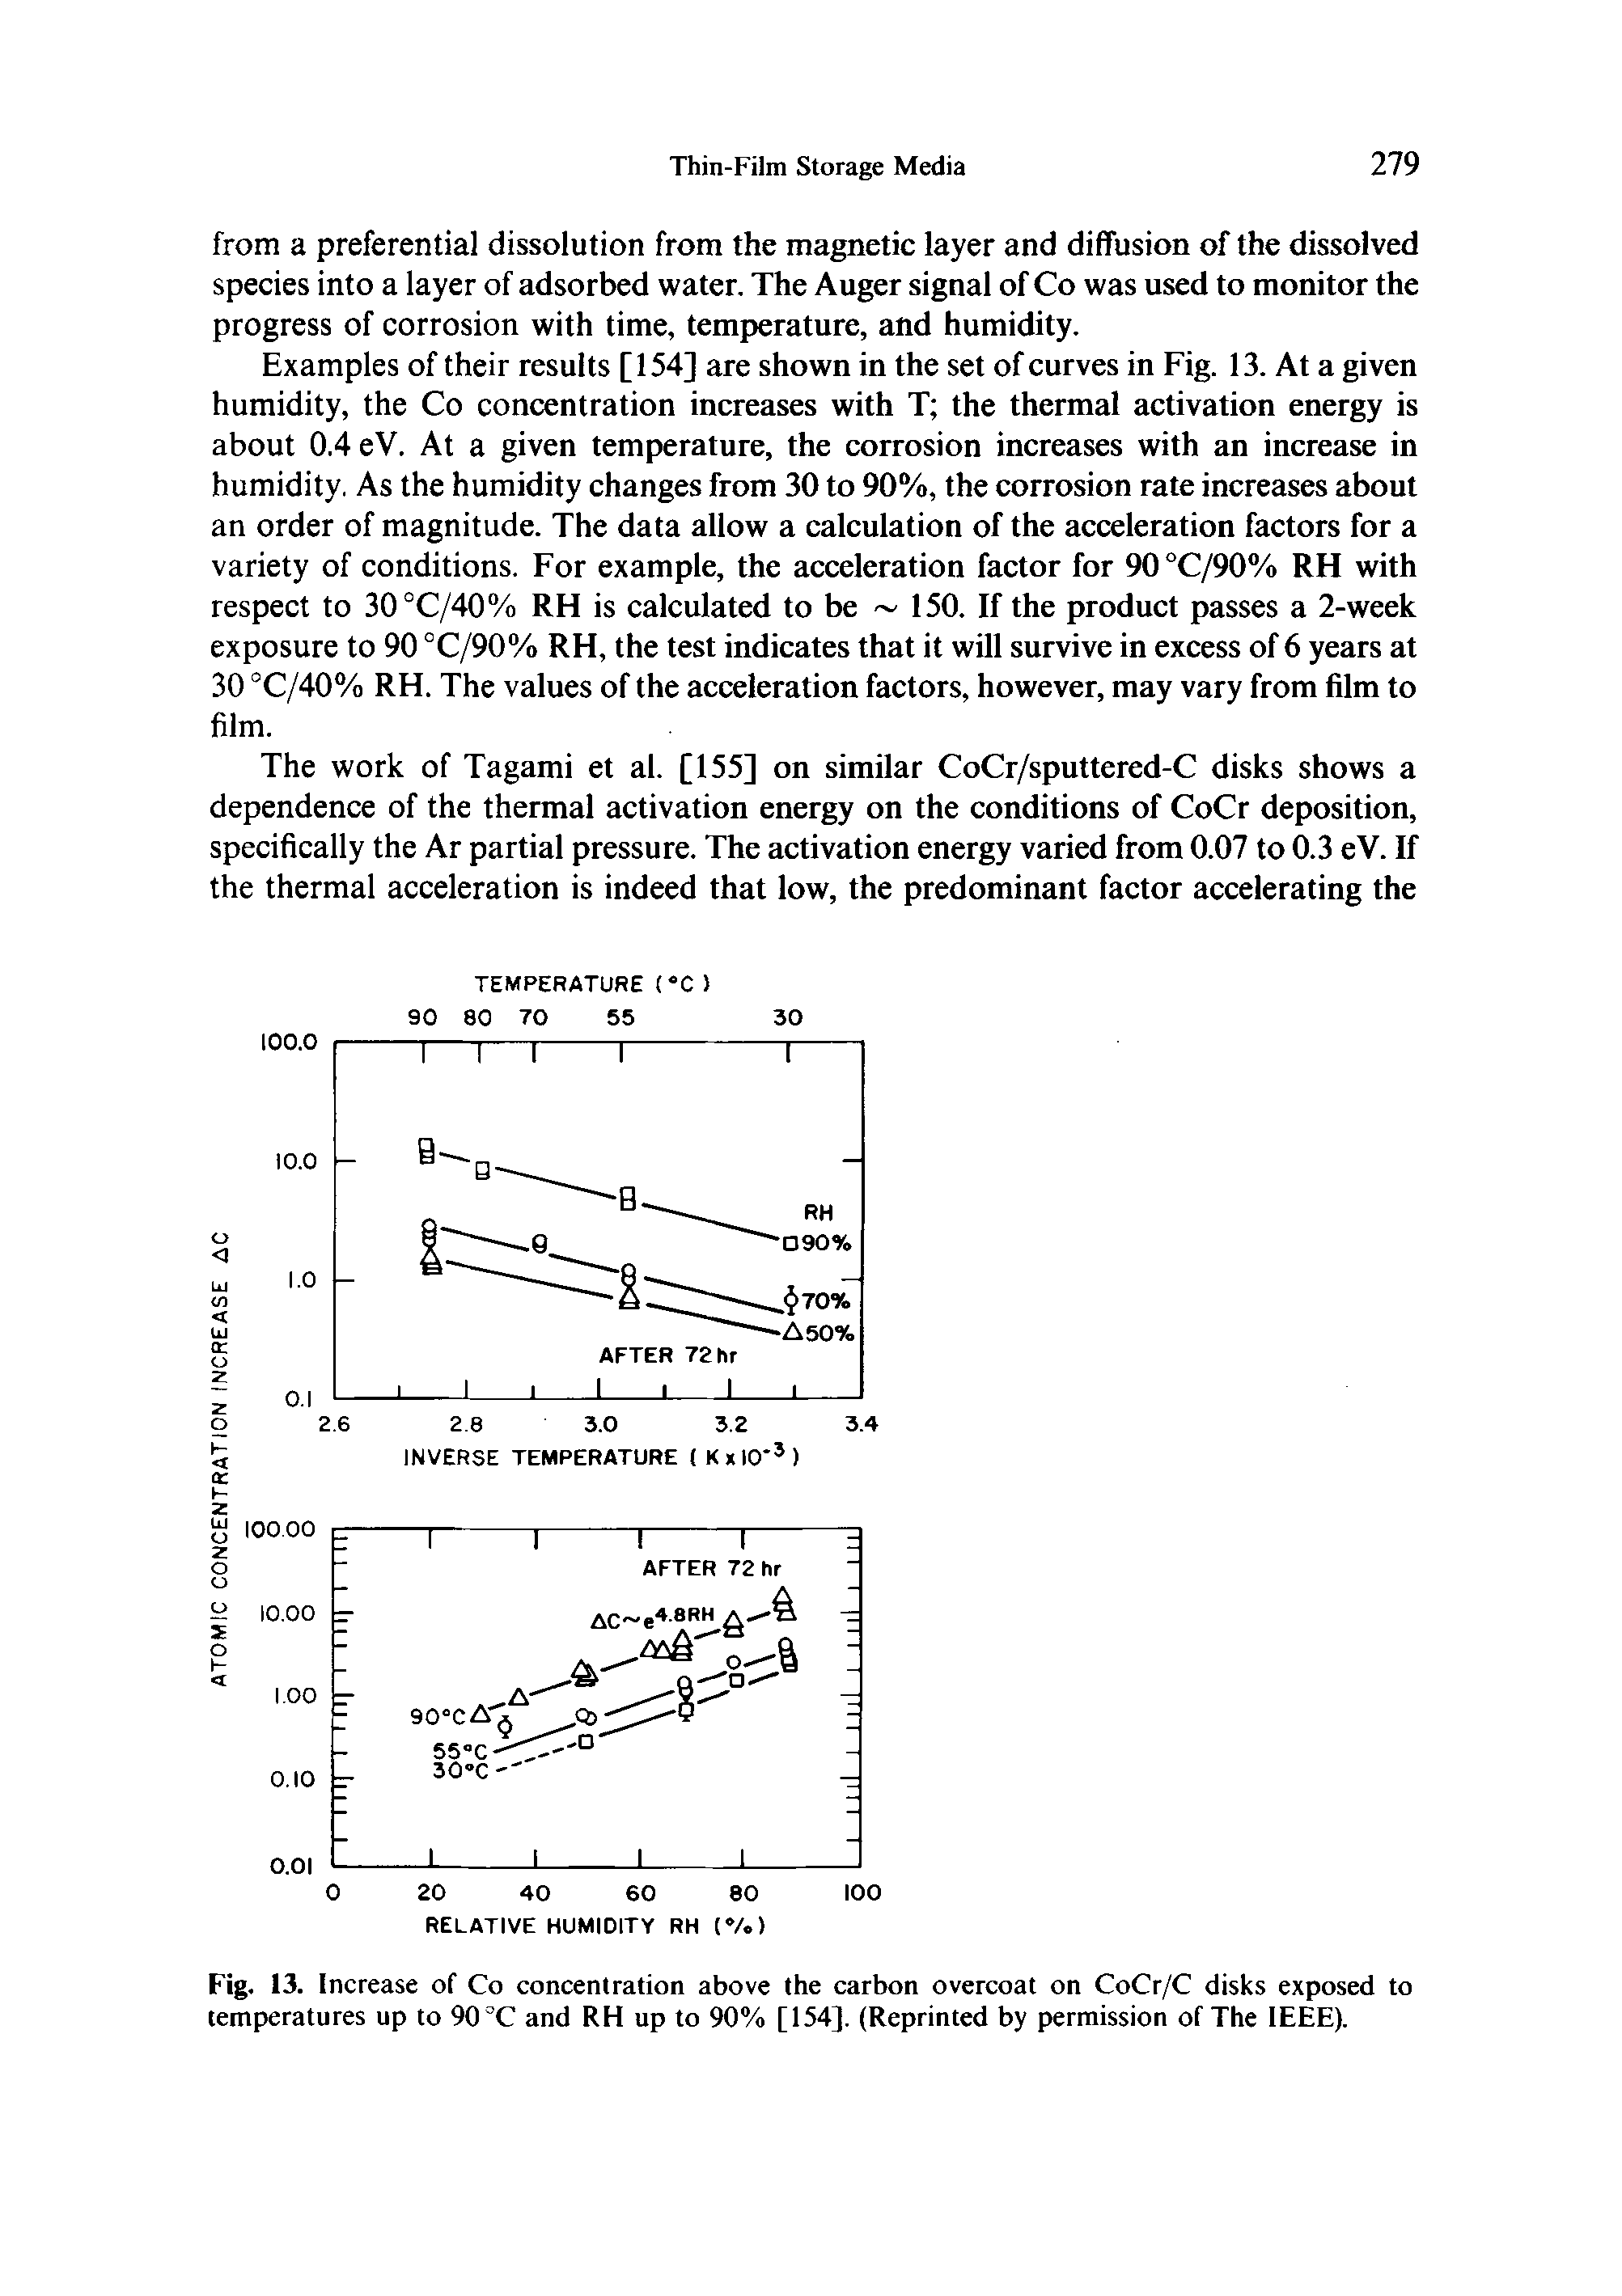 Fig. 13. Increase of Co concentration above the carbon overcoat on CoCr/C disks exposed to temperatures up to 90 °C and RH up to 90% [154]. (Reprinted by permission of The IEEE).